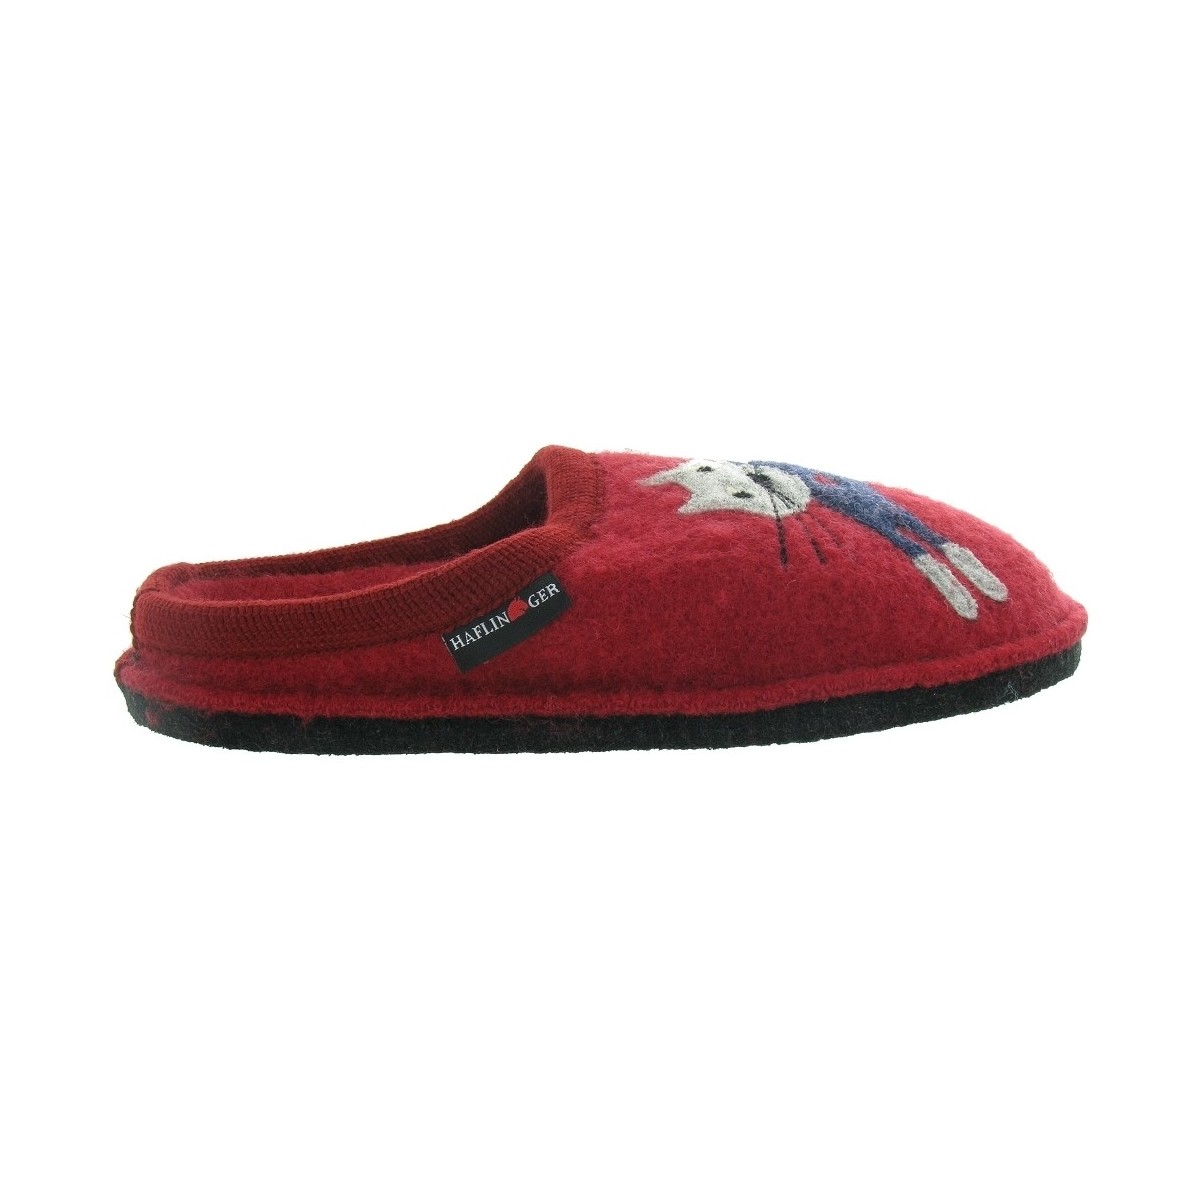 Chaussures Femme Chaussons Haflinger CUCHO TWINS Rouge